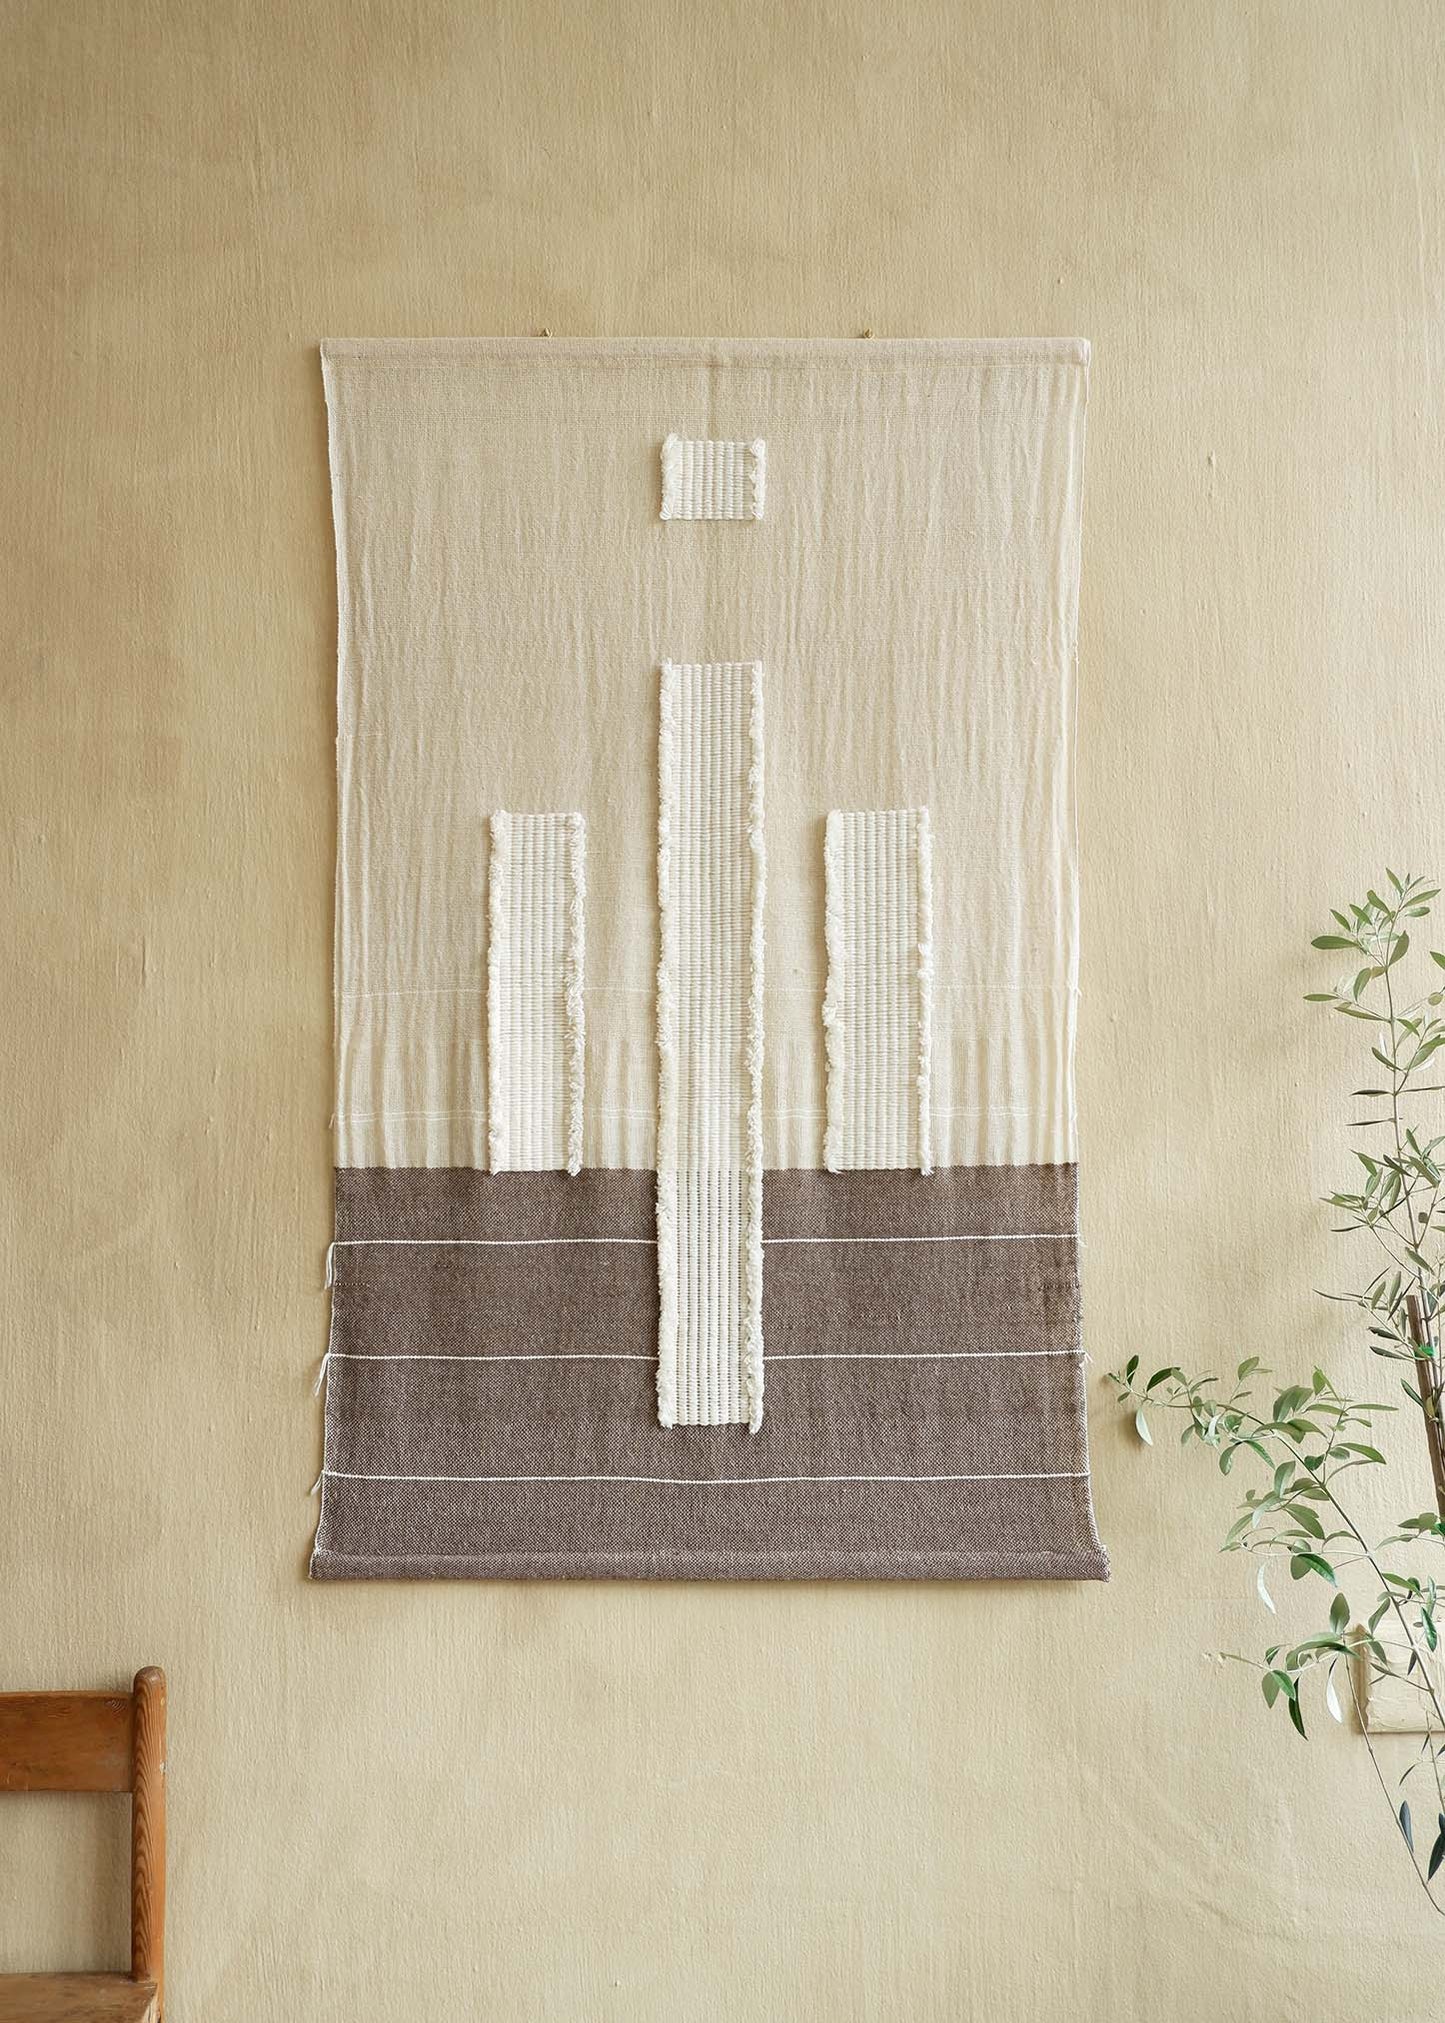 'Cathedral' Original artwork handwoven by Leila Walter using Vintage & locally sourced wool & cotton